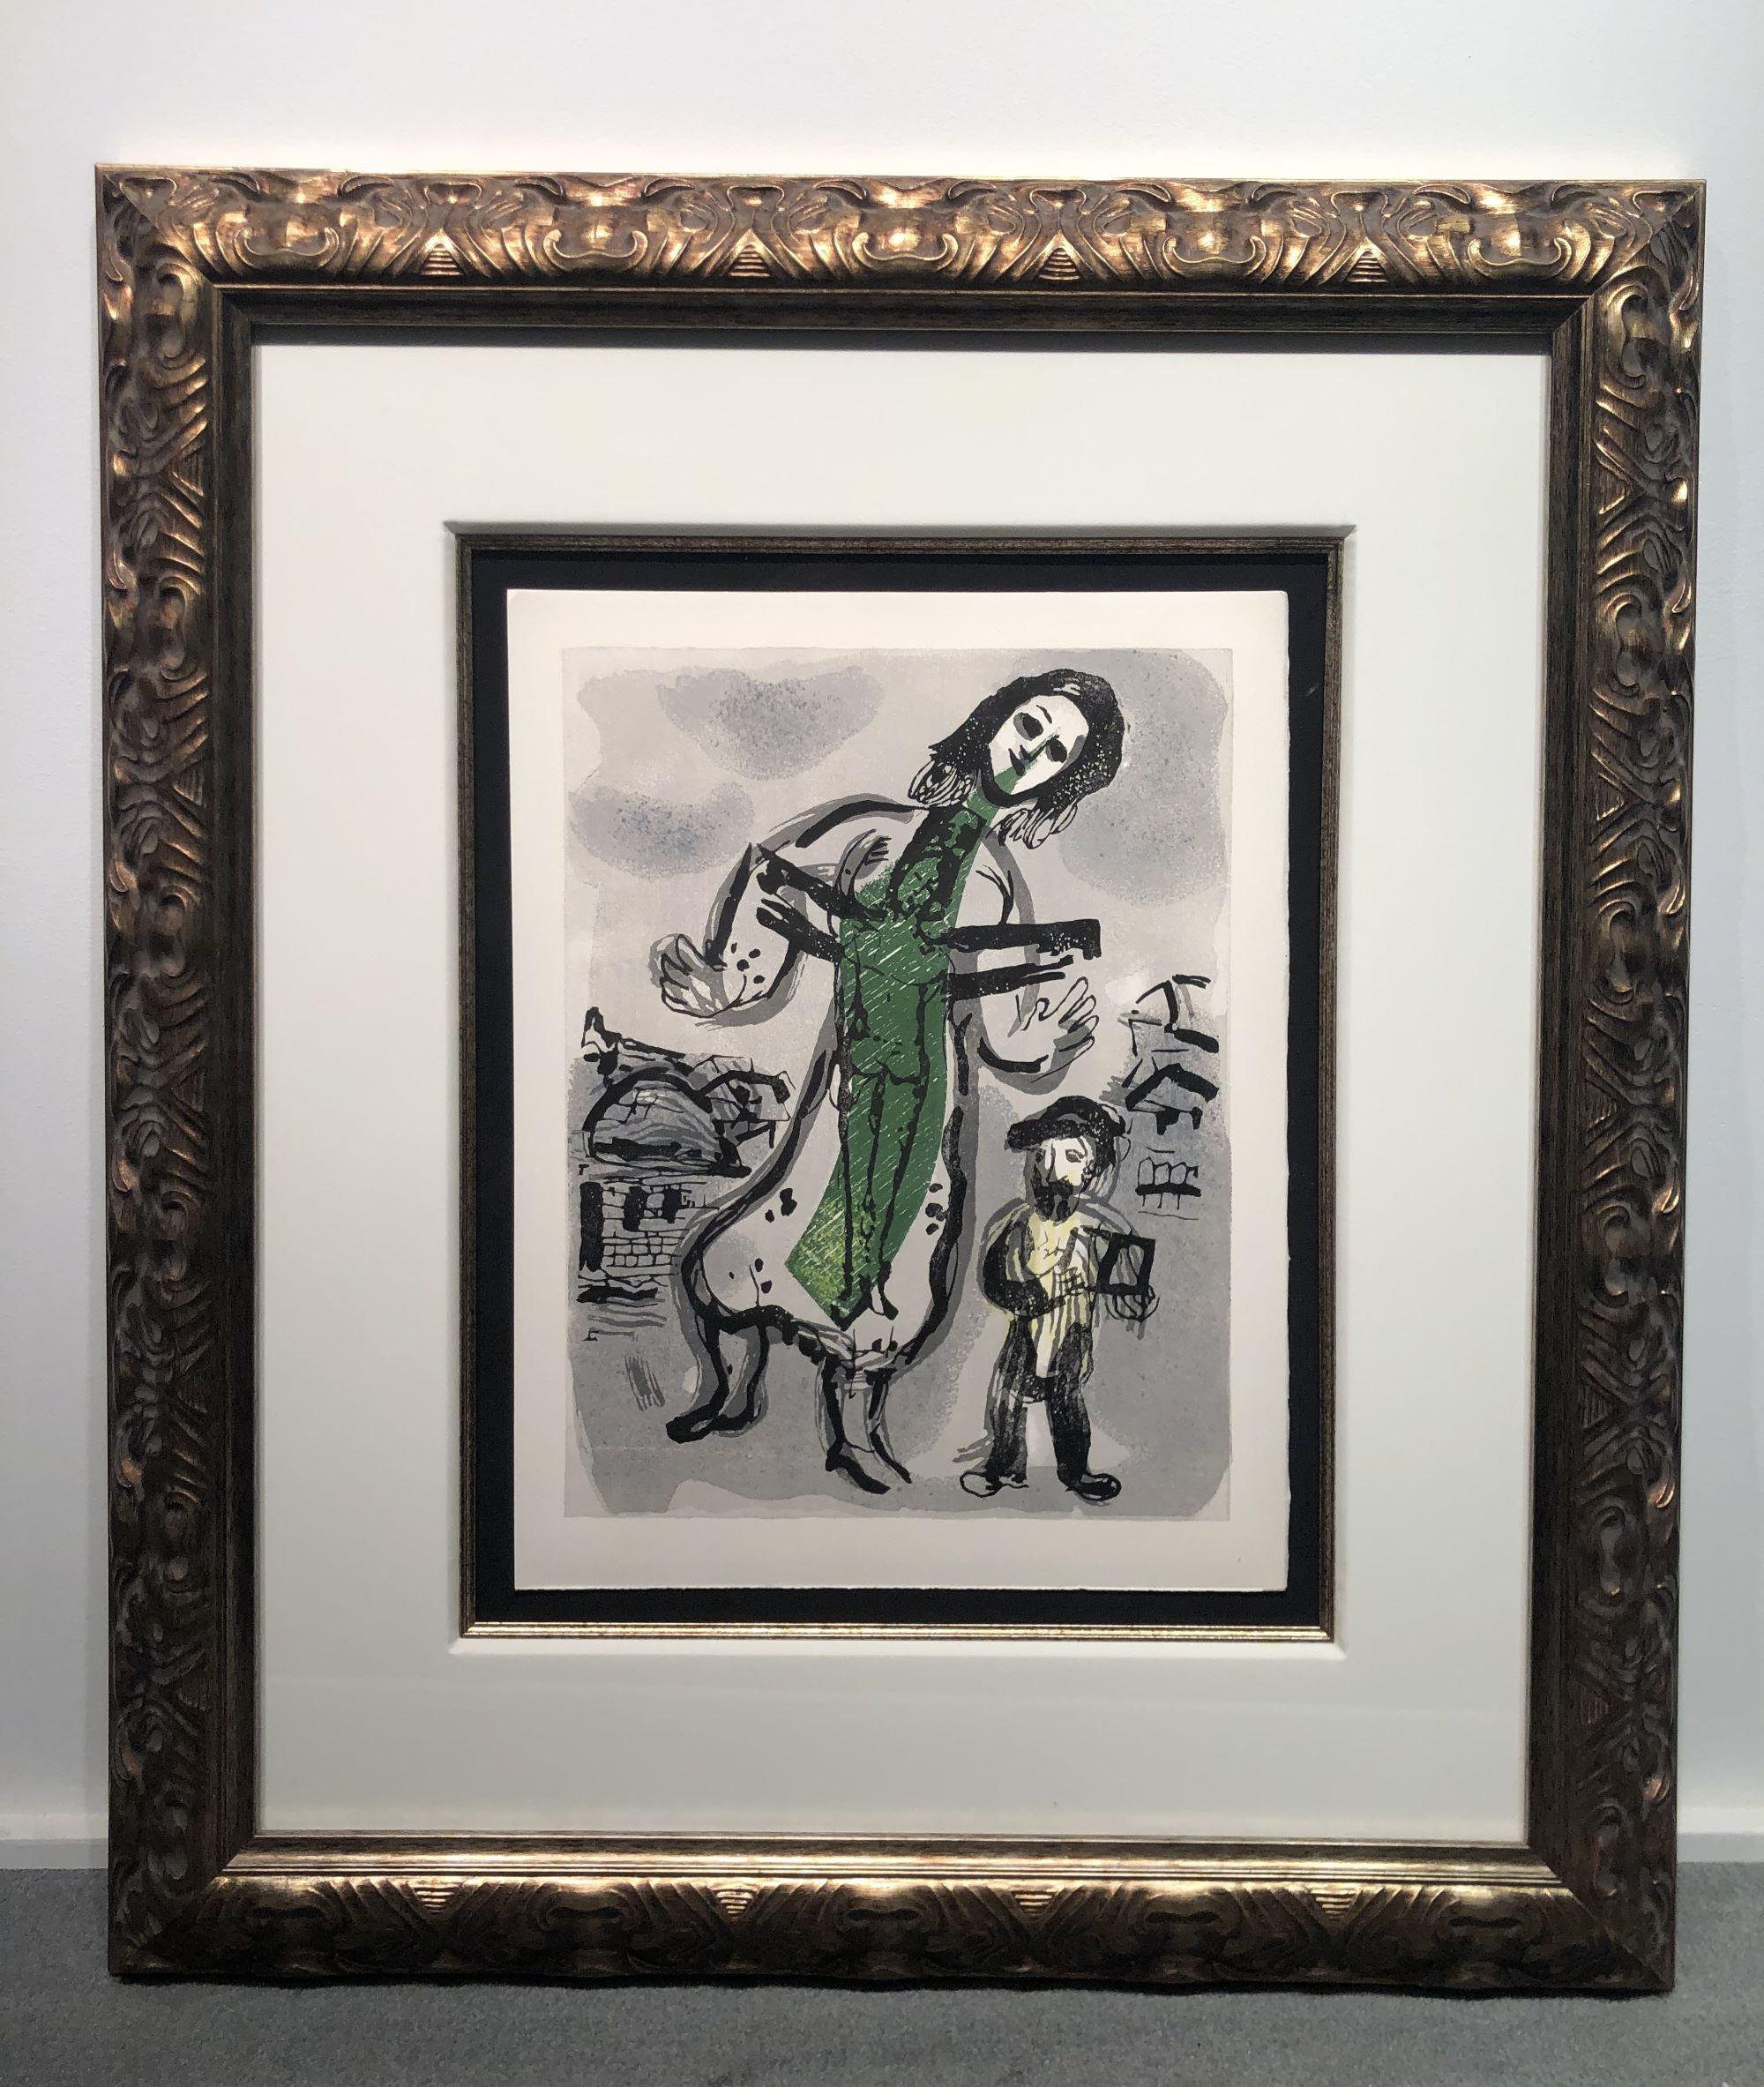 Où est le Jour (Where is the Day) is a woodcut on paper from Marc Chagall's Poèmes portfolio, published in 1968. The image size is 13 x 10 inches and the art is framed in an ornate, gold-tone frame. Unsigned as issued, from the edition of 238